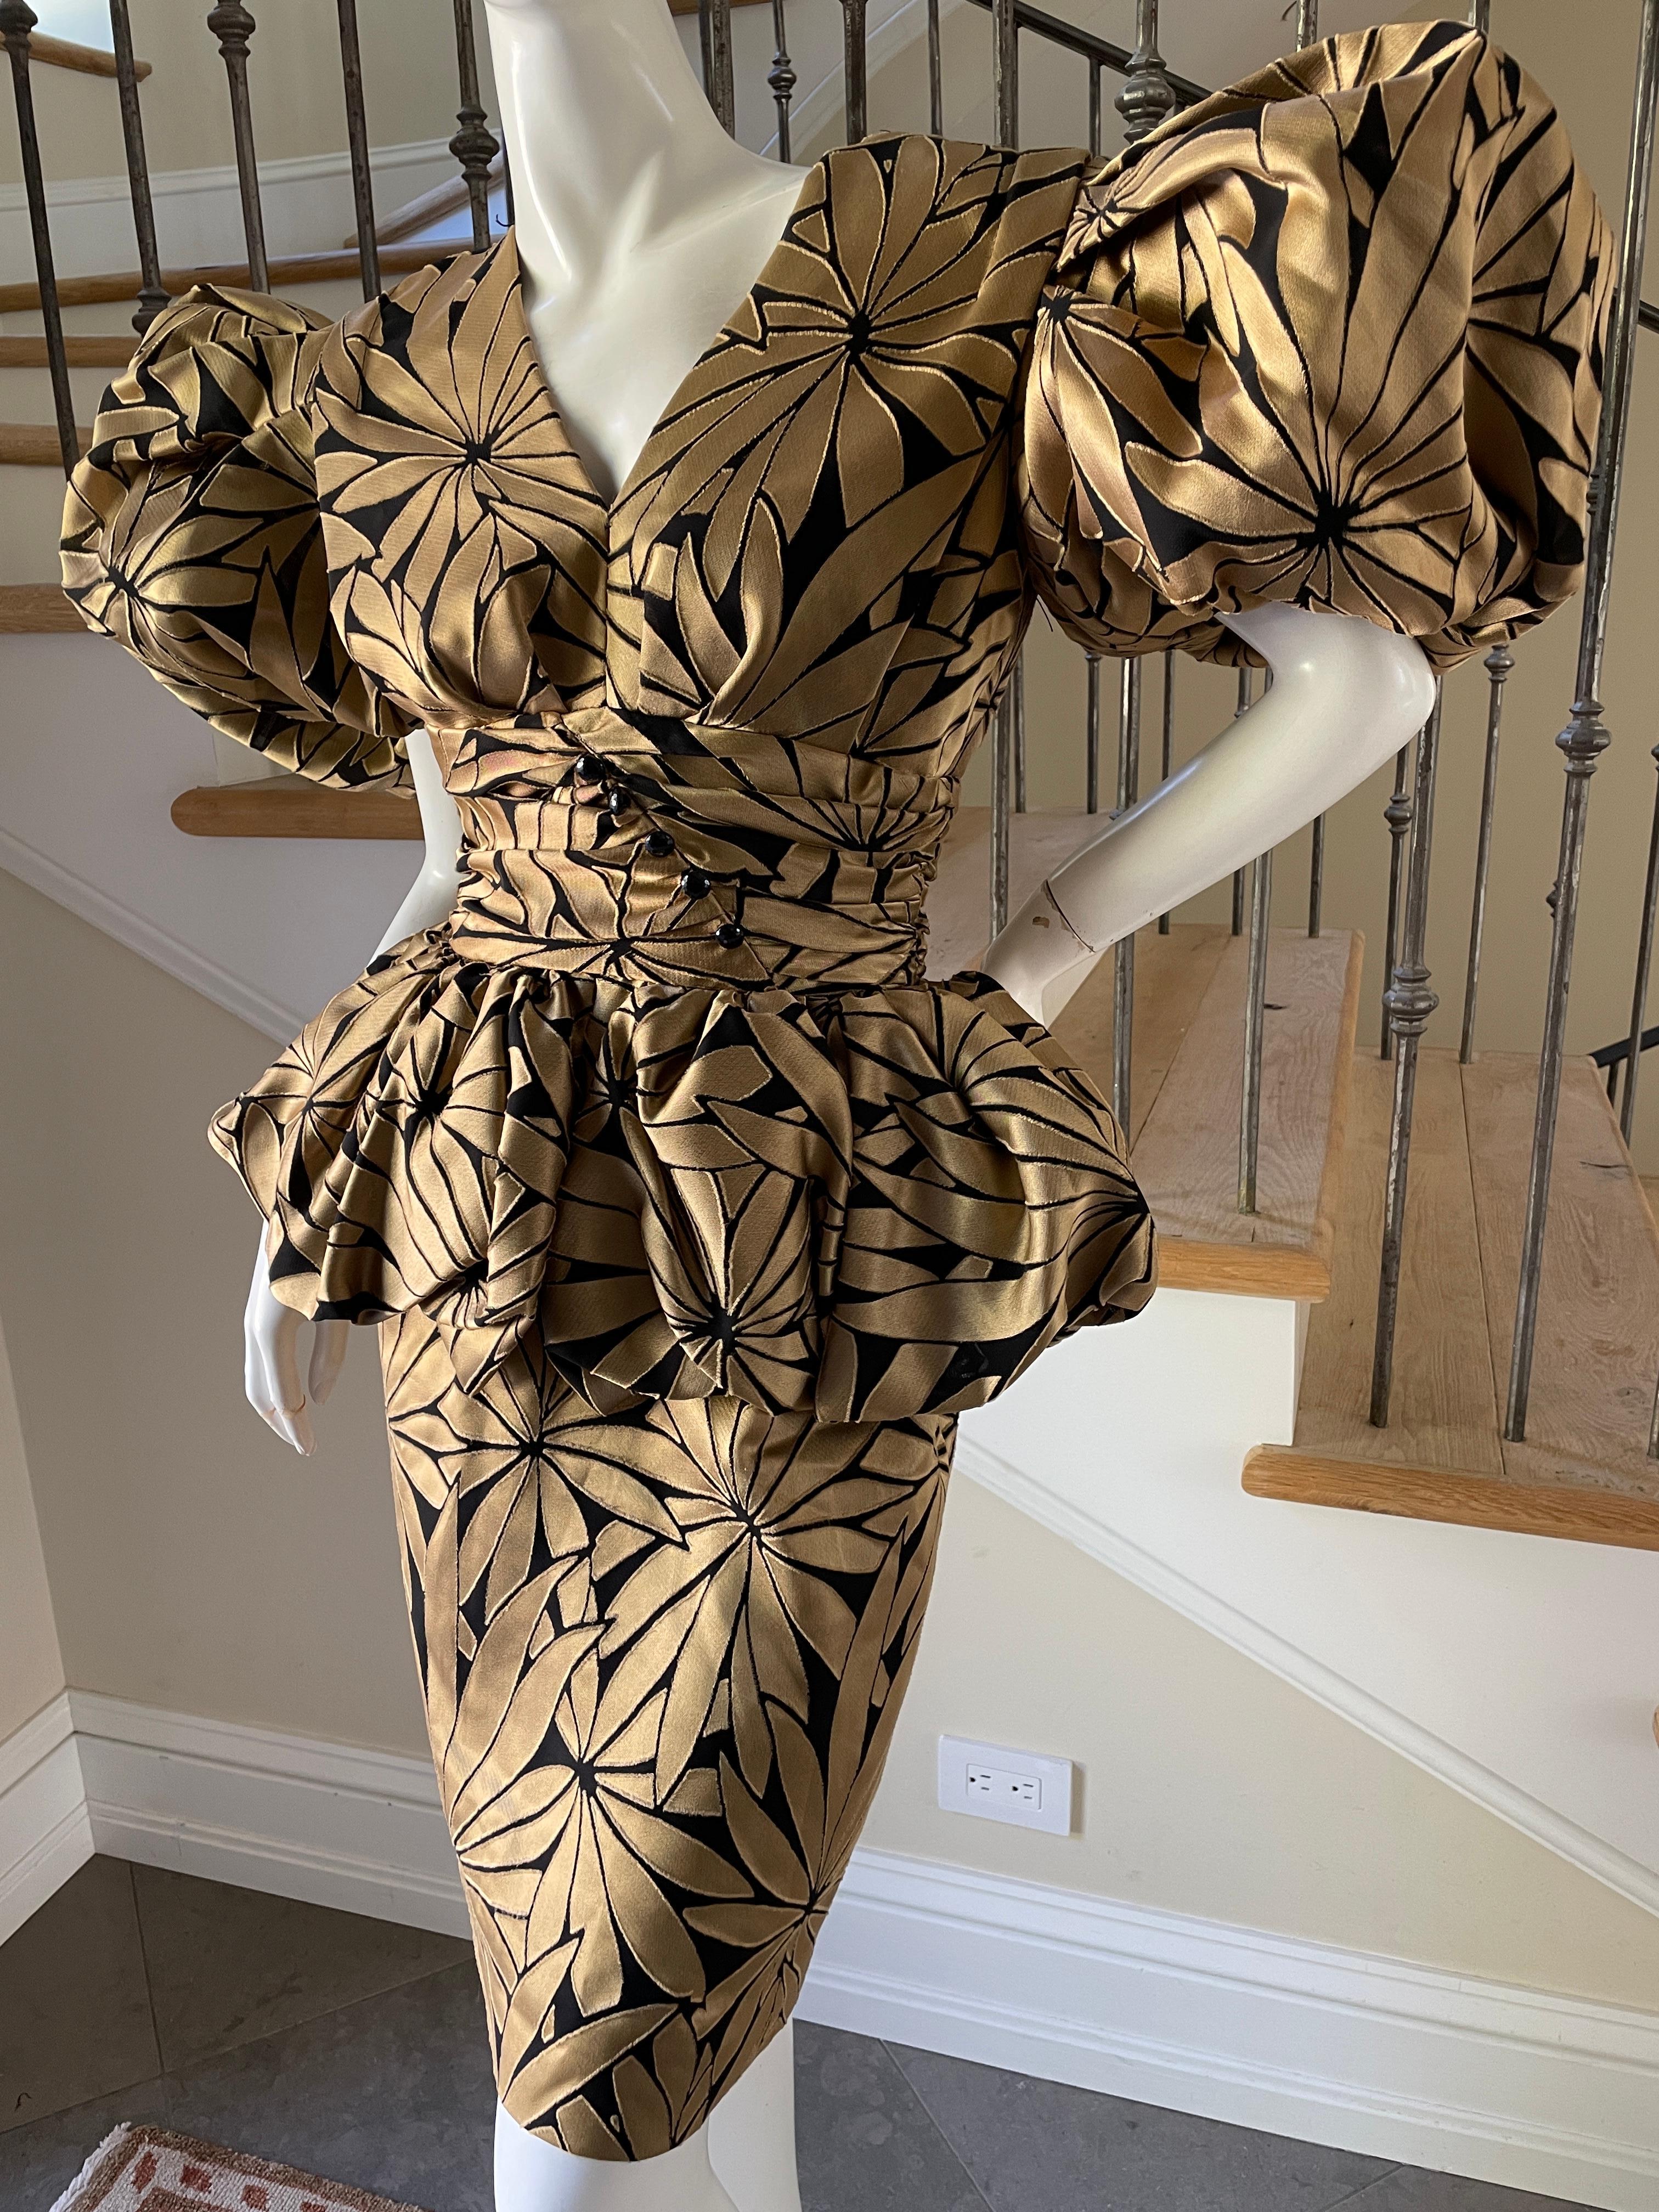 Victor Costa 1980's Gold Floral Peplum Evening Dress w Exaggerated Pouf Sleeves In Excellent Condition For Sale In Cloverdale, CA